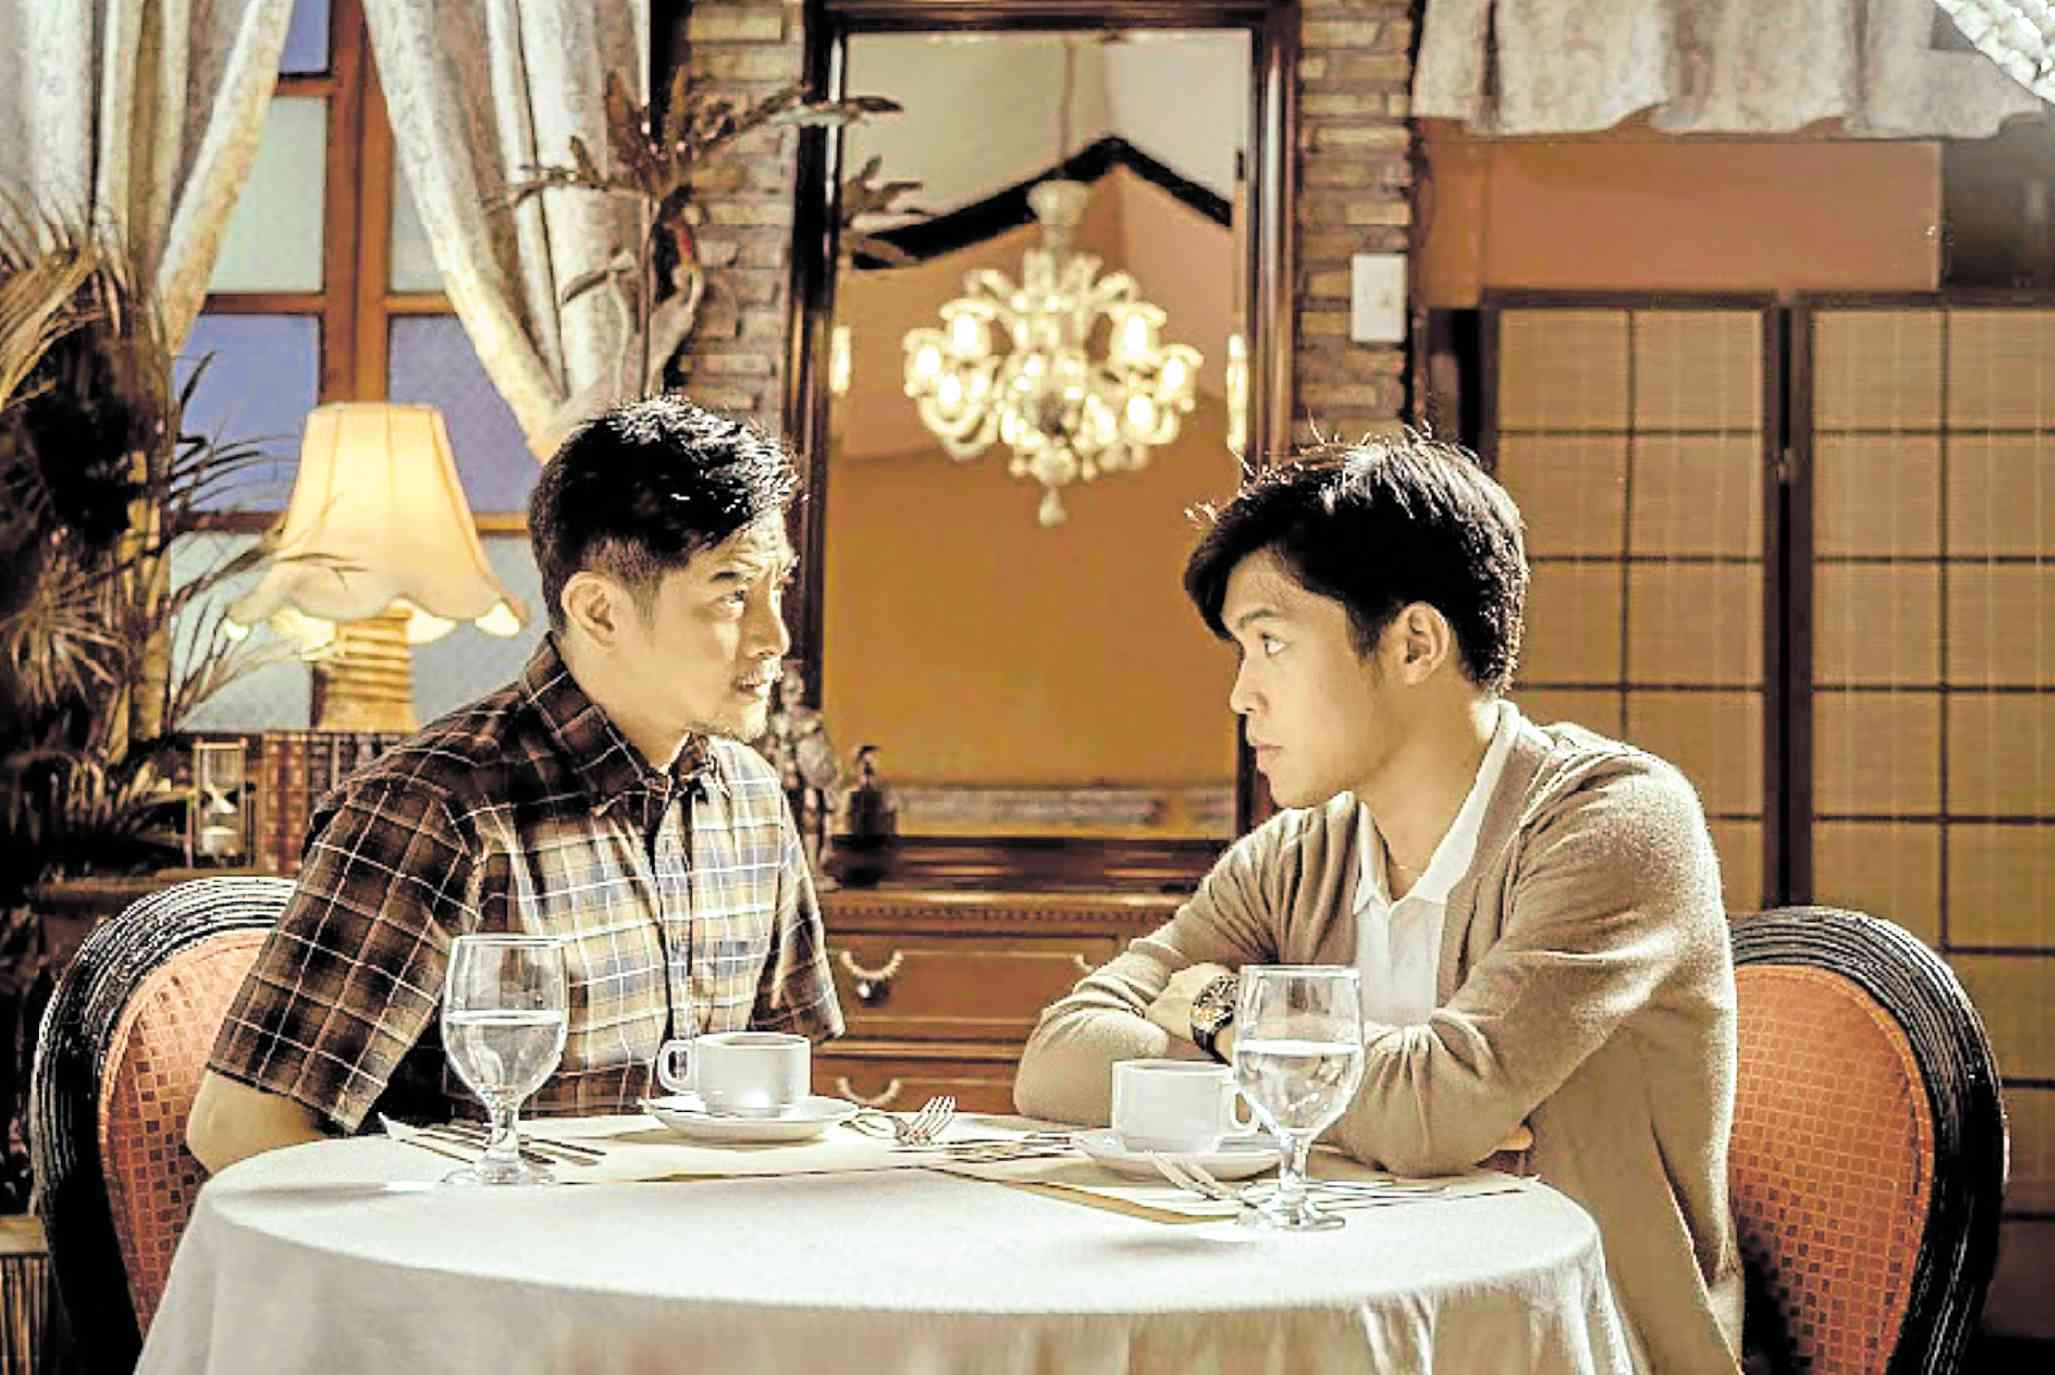 Romnick Sarmenta (left) and Elijah Canlas in“About Us But Not About Us”